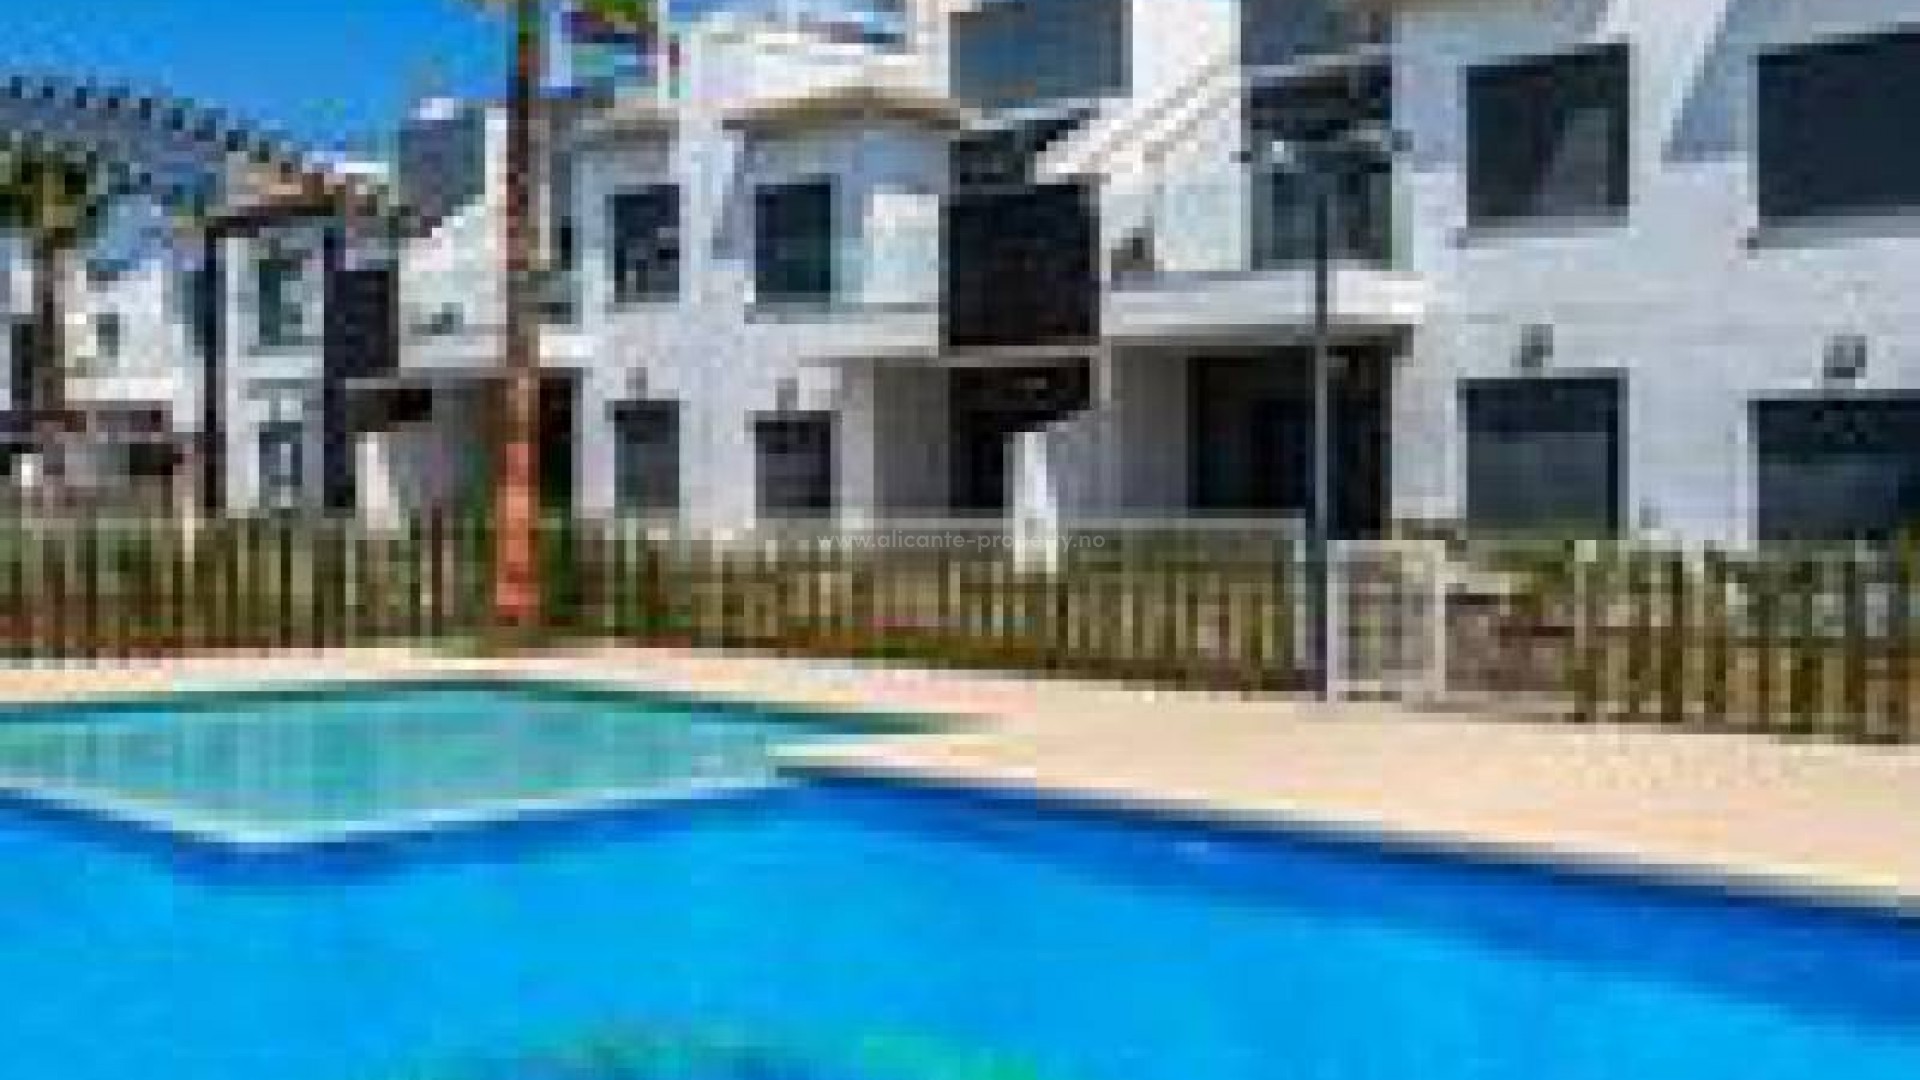 Bungalows available in NEW RESORT in Pilar de la Horadada with 2 bedrooms, 2 bathrooms and a shared pool. Furniture and white goods included.